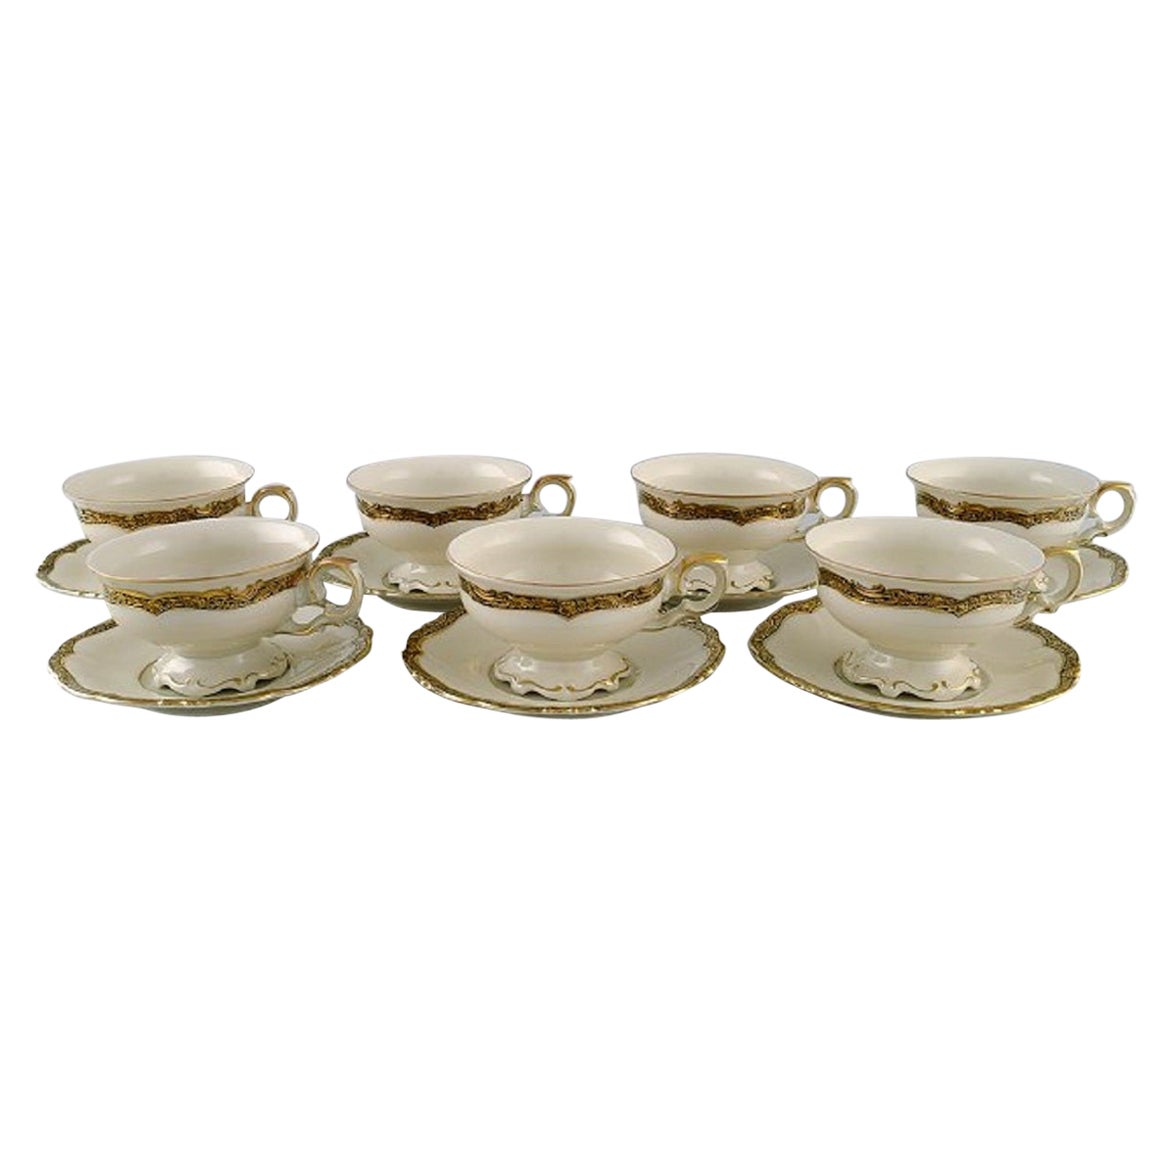 KPM, Berlin, Seven Royal Ivory Tea Cups with Saucers in Cream-Colored Porcelain  For Sale